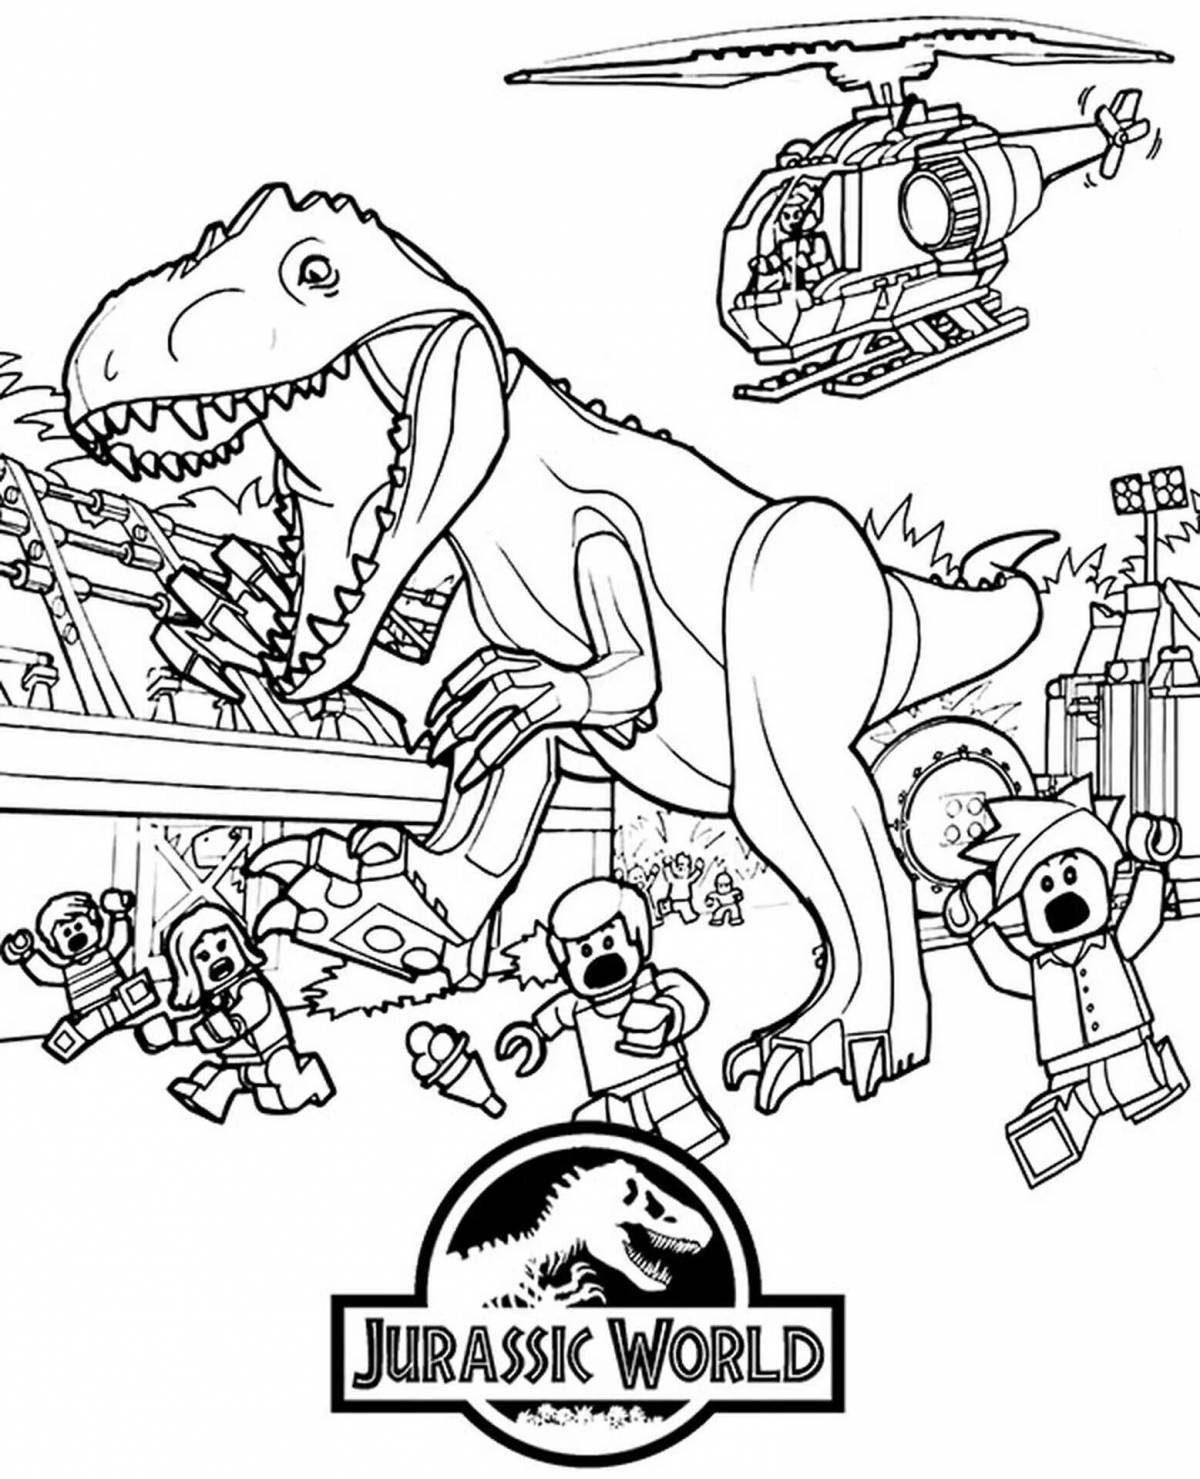 Colorful jurassic world domination coloring page